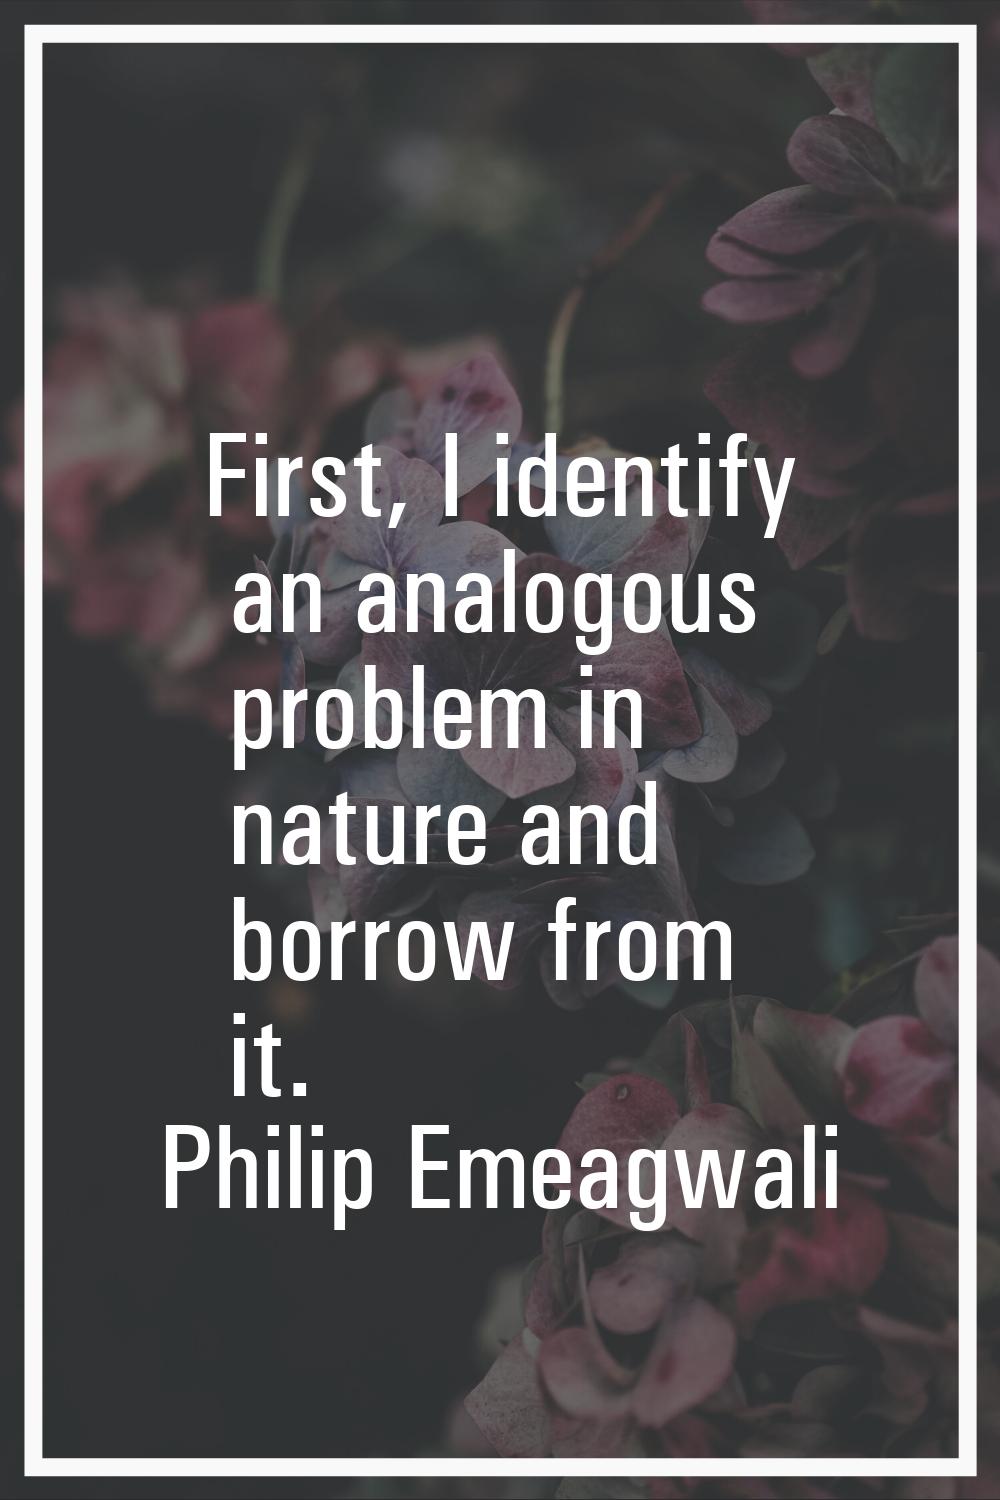 First, I identify an analogous problem in nature and borrow from it.